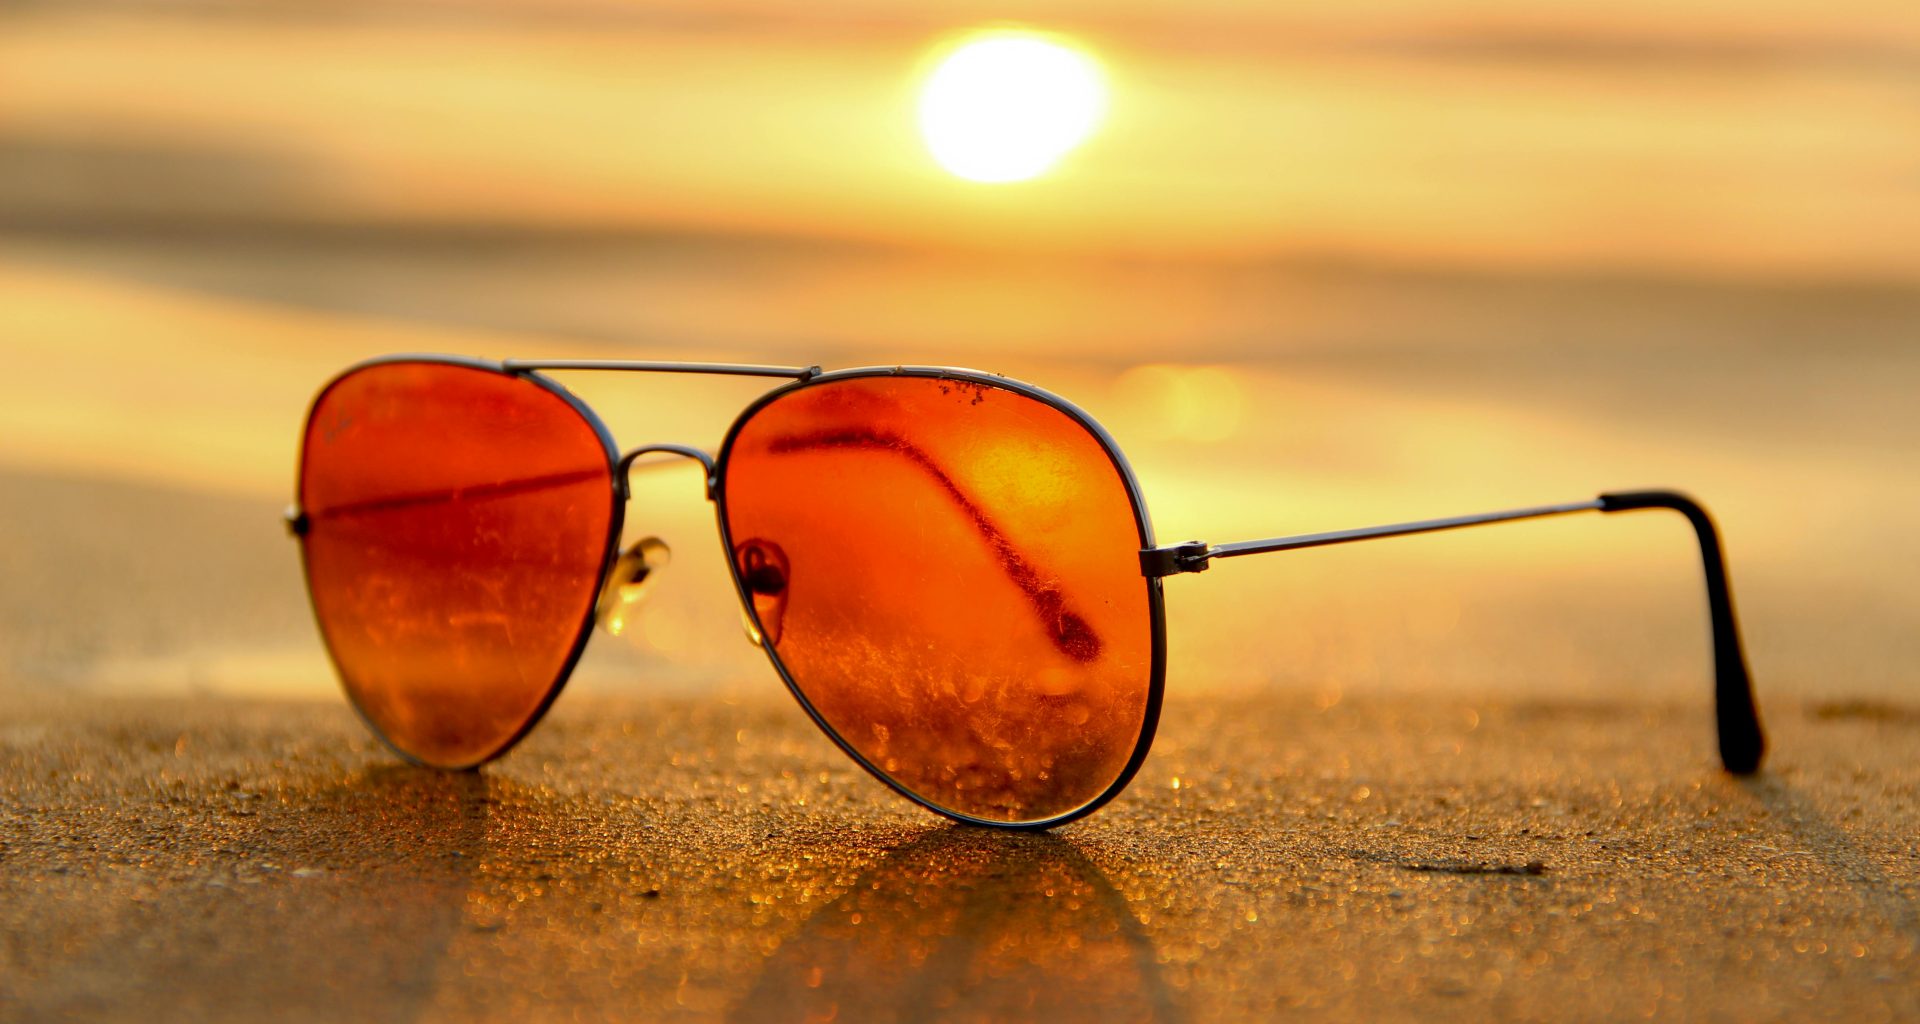 Sunglasses on a beach. Sunglasses can offer UV protection for your eyes.